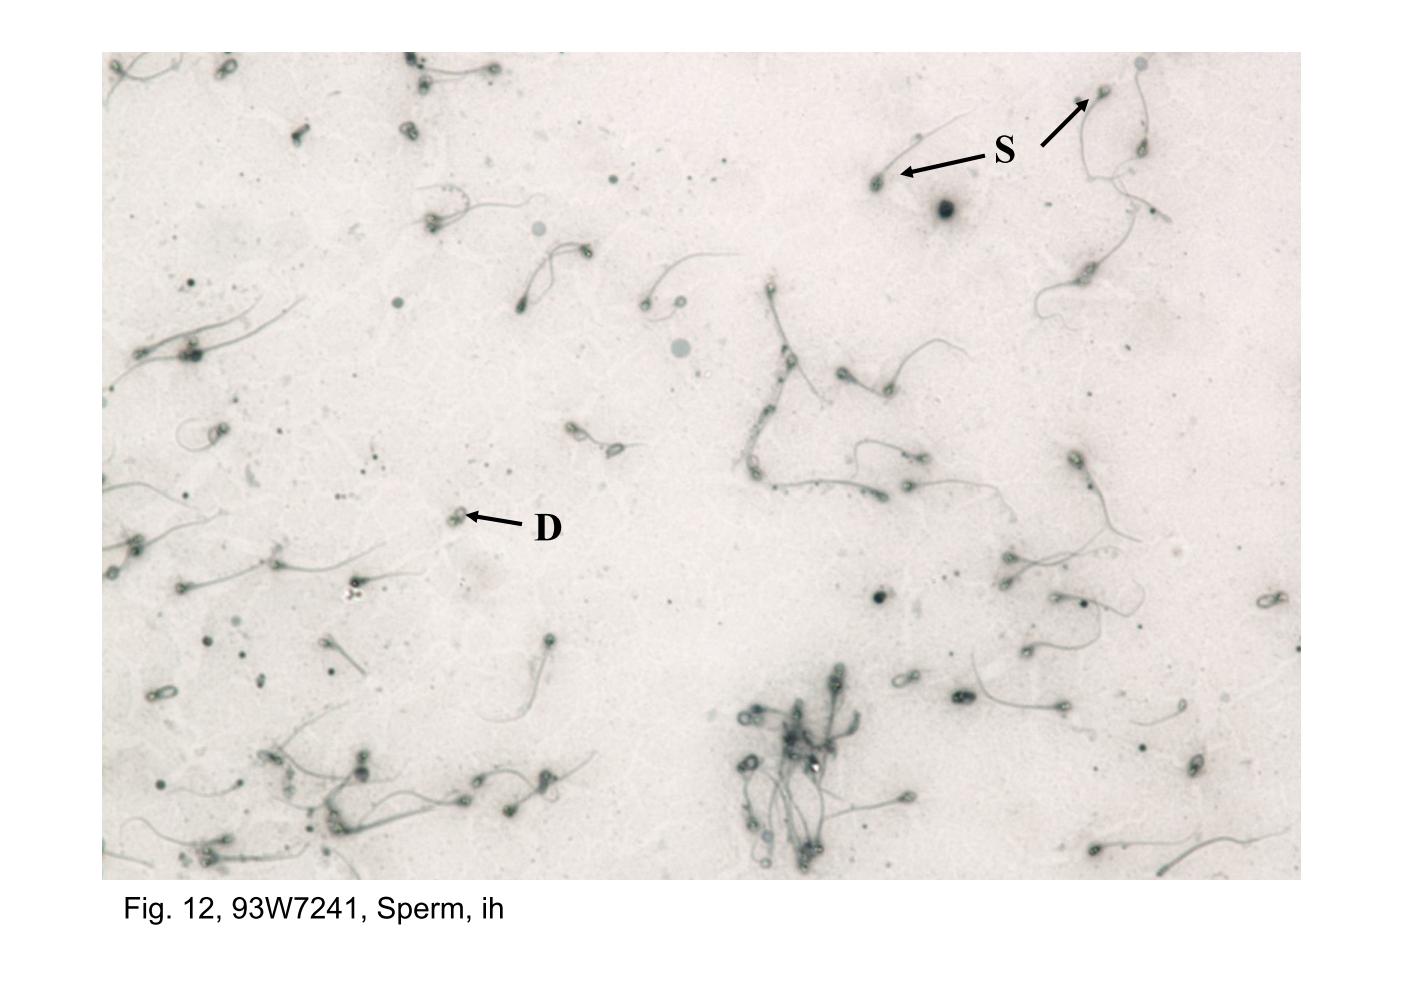 block14_23.jpg - Fig. 12, 93W7241, Sperm, ih (Semen smear)Semen, the product of ejaculation, consists of spermatozoa (S) and  seminal fluid which is derived principally from the seminal vesicles  and prostate gland. The desquamated cells (D) and urinary tract  debris are normal constituents of semen.